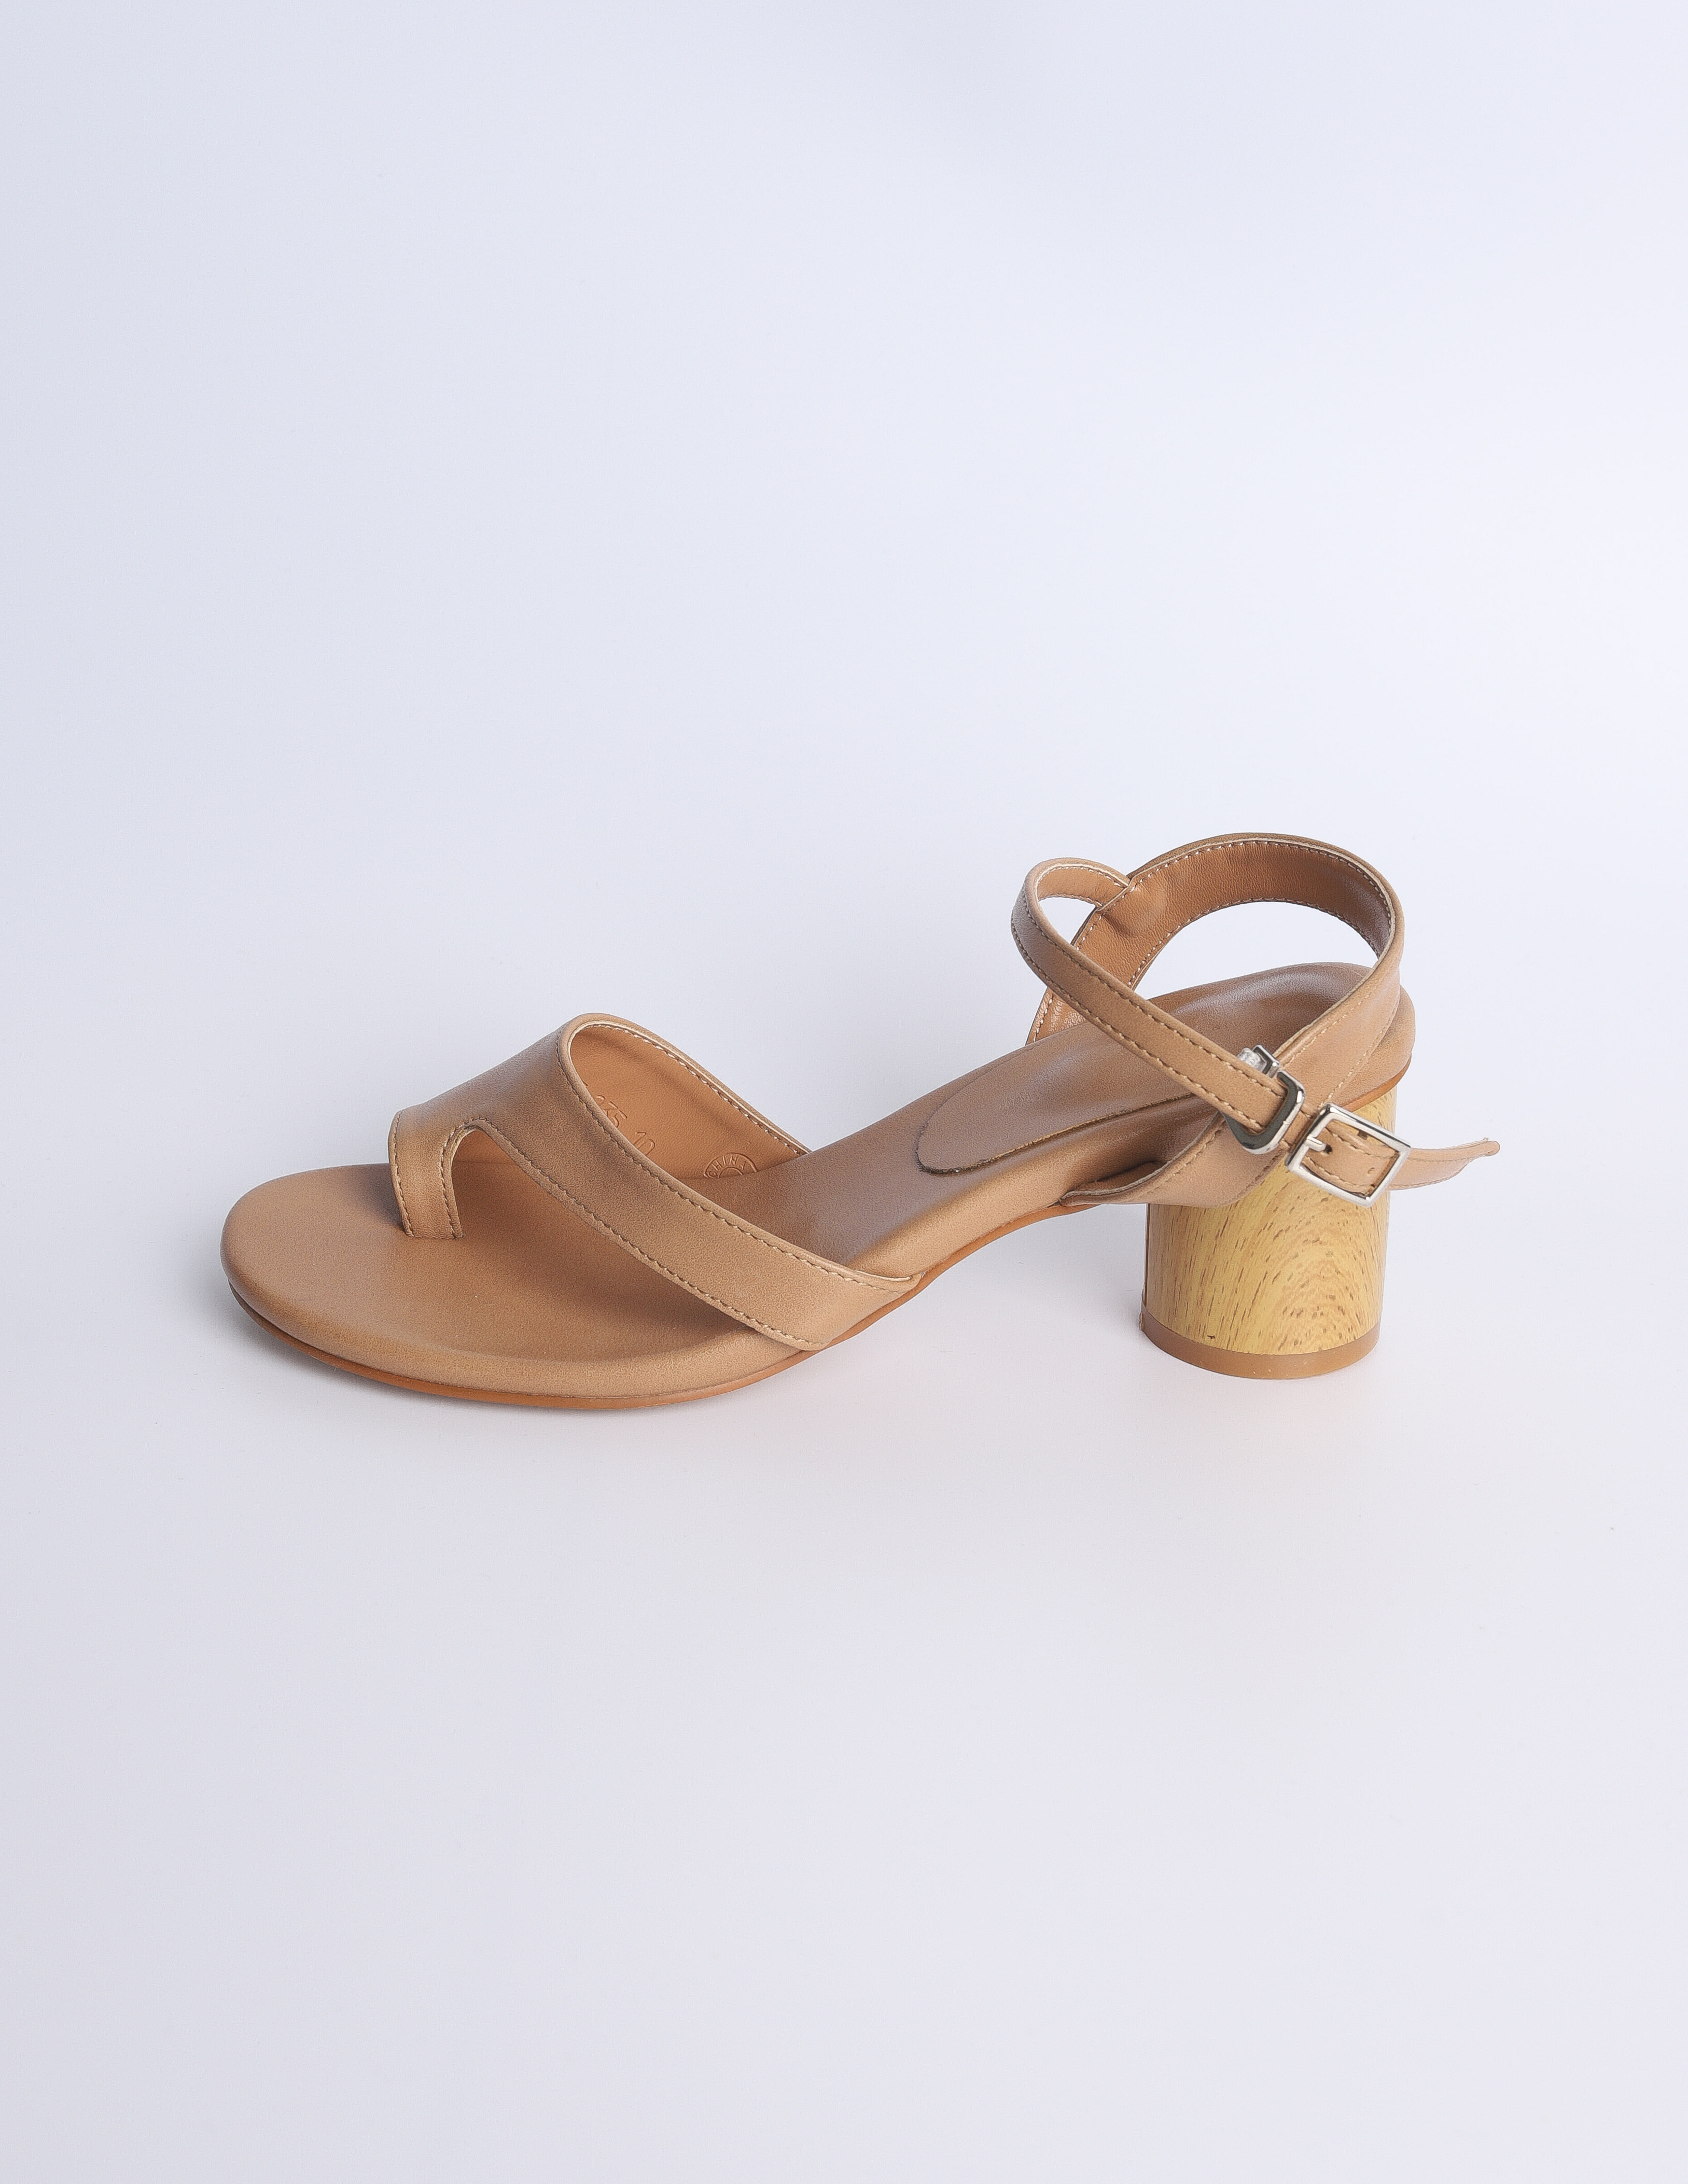 Mid Heel Strapped Sandals